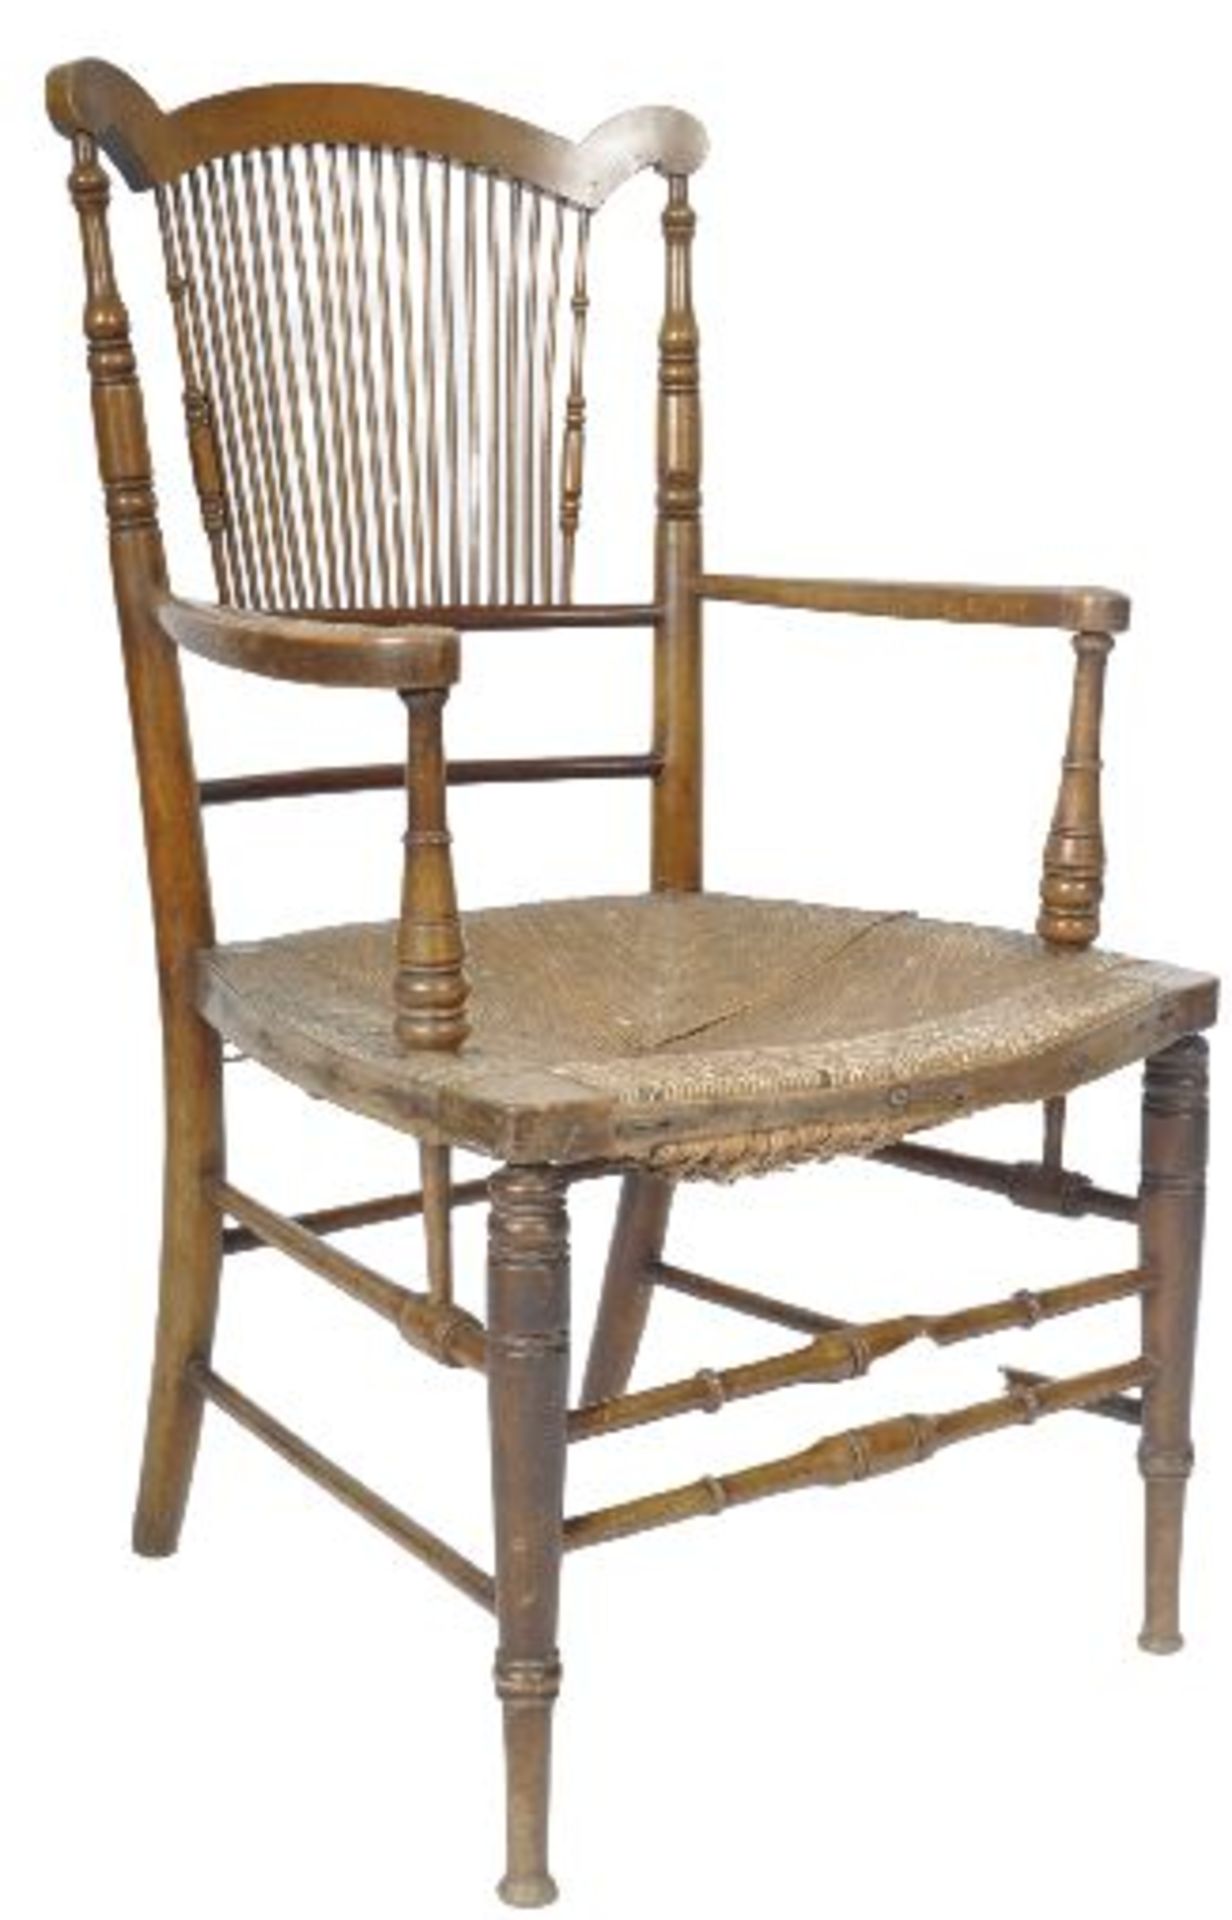 19TH CENTURY ARTS AND CRAFTS ARMCHAIR